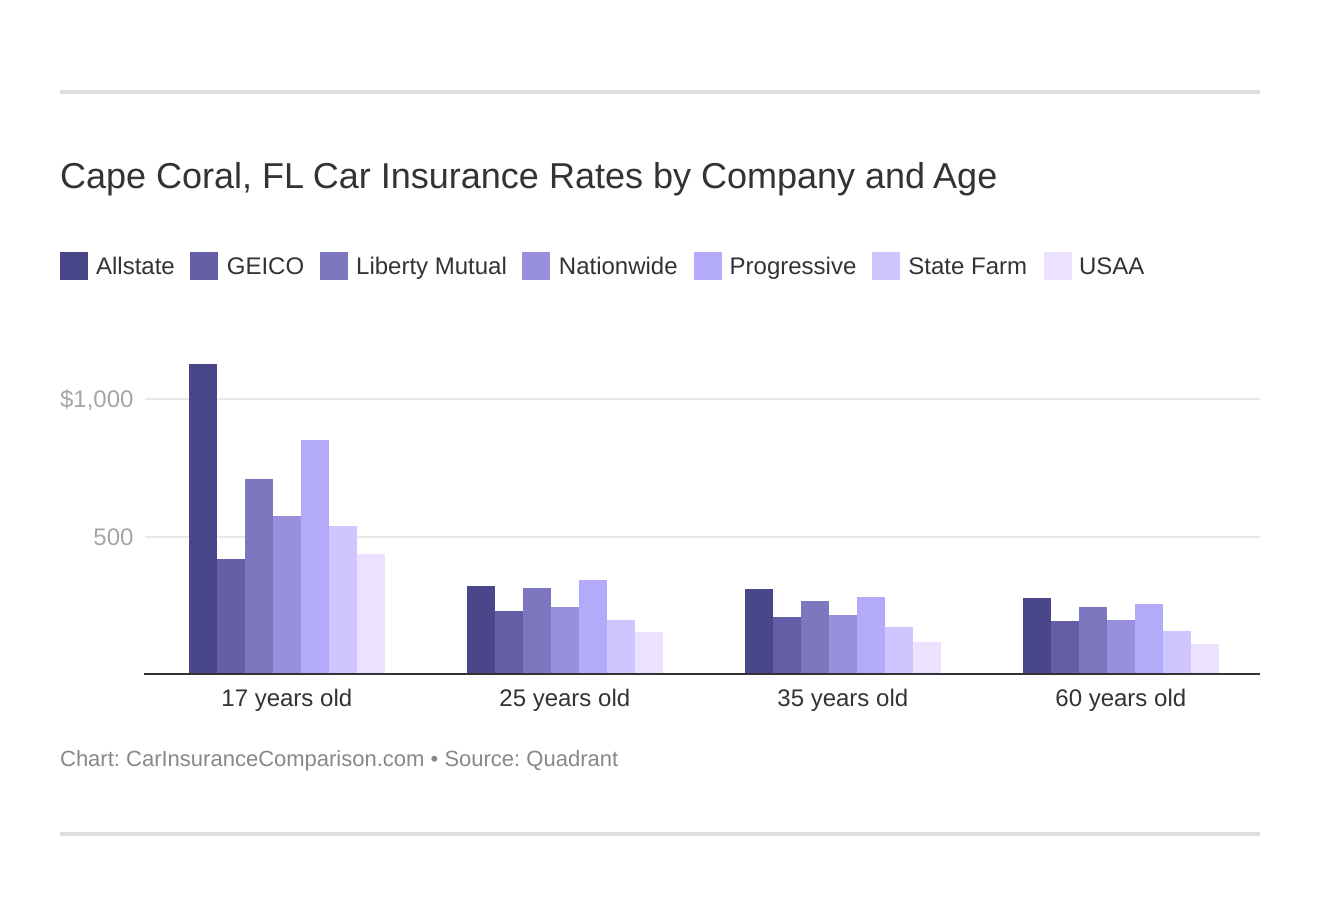 Cape Coral, FL Car Insurance Rates by Company and Age